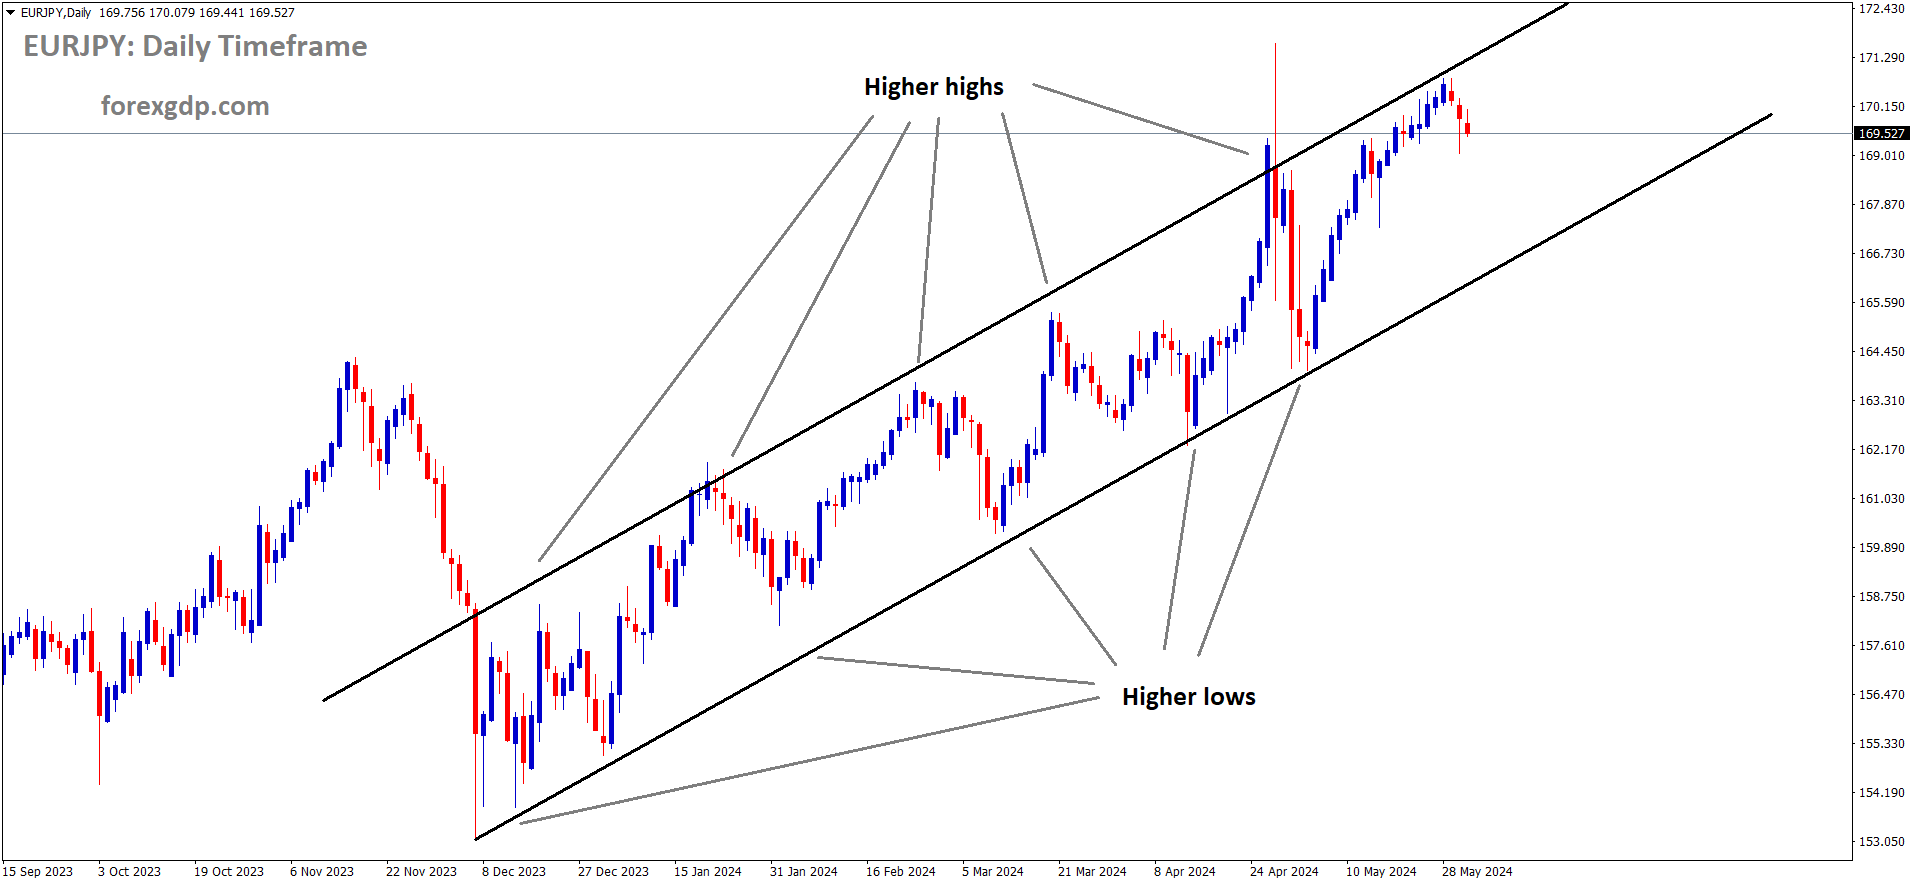 EURJPY is moving in Ascending channel and market has reached higher high area of the channel